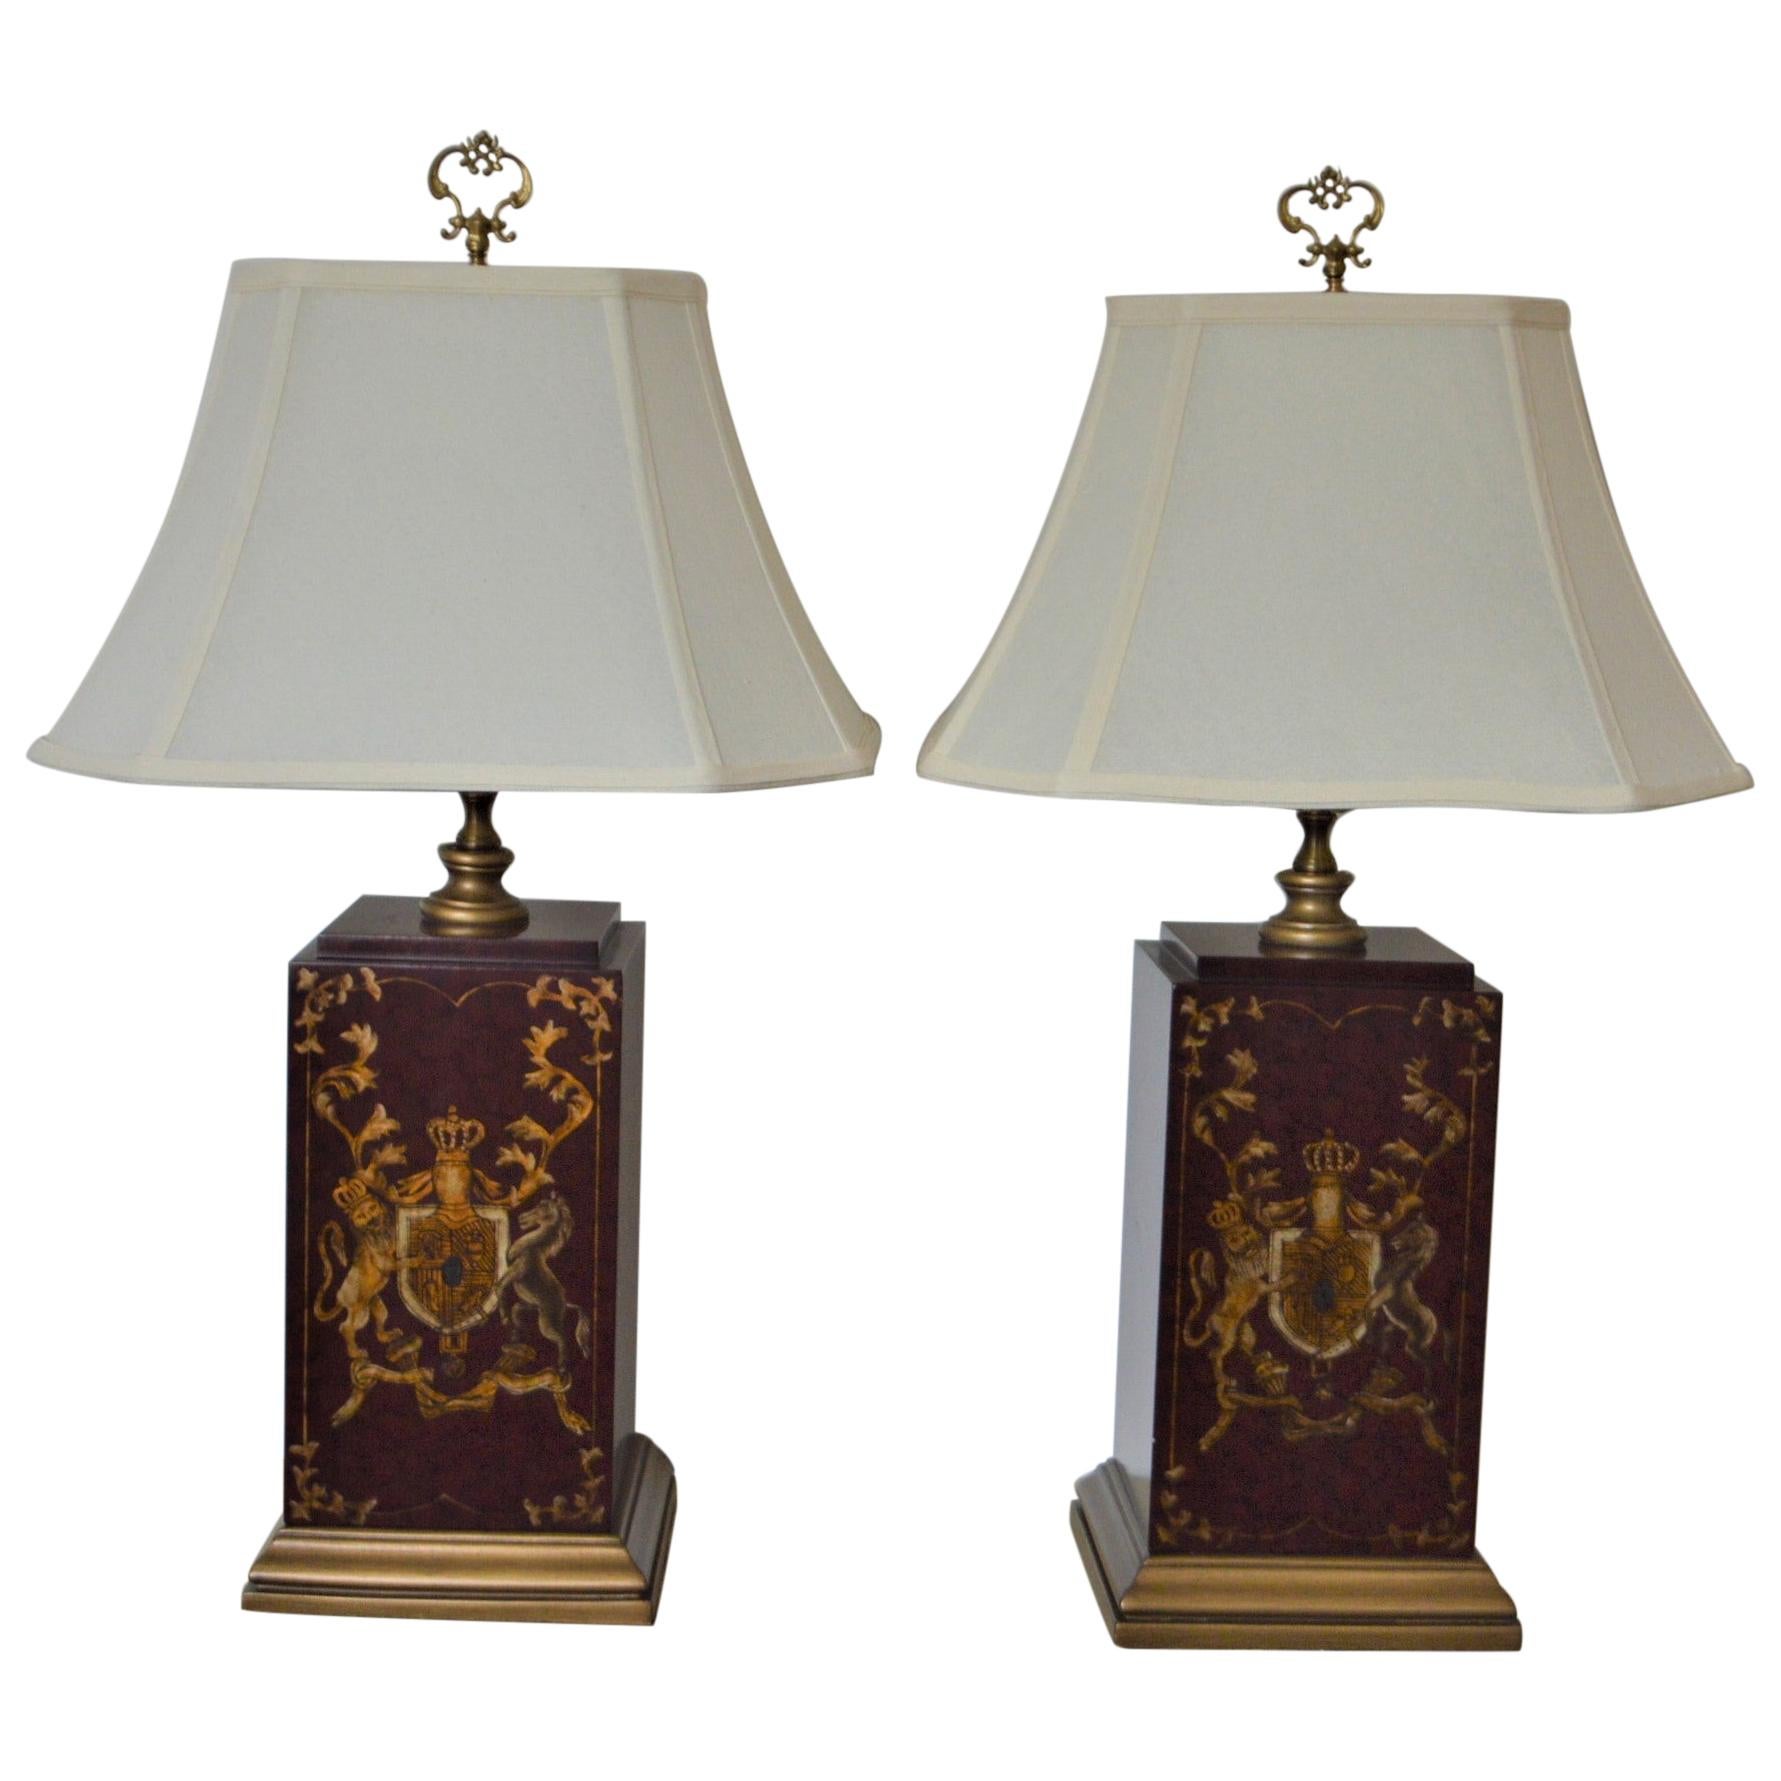 Pair of Painted Wooden Table Lamps Decorated with Armorial and Musical Design For Sale